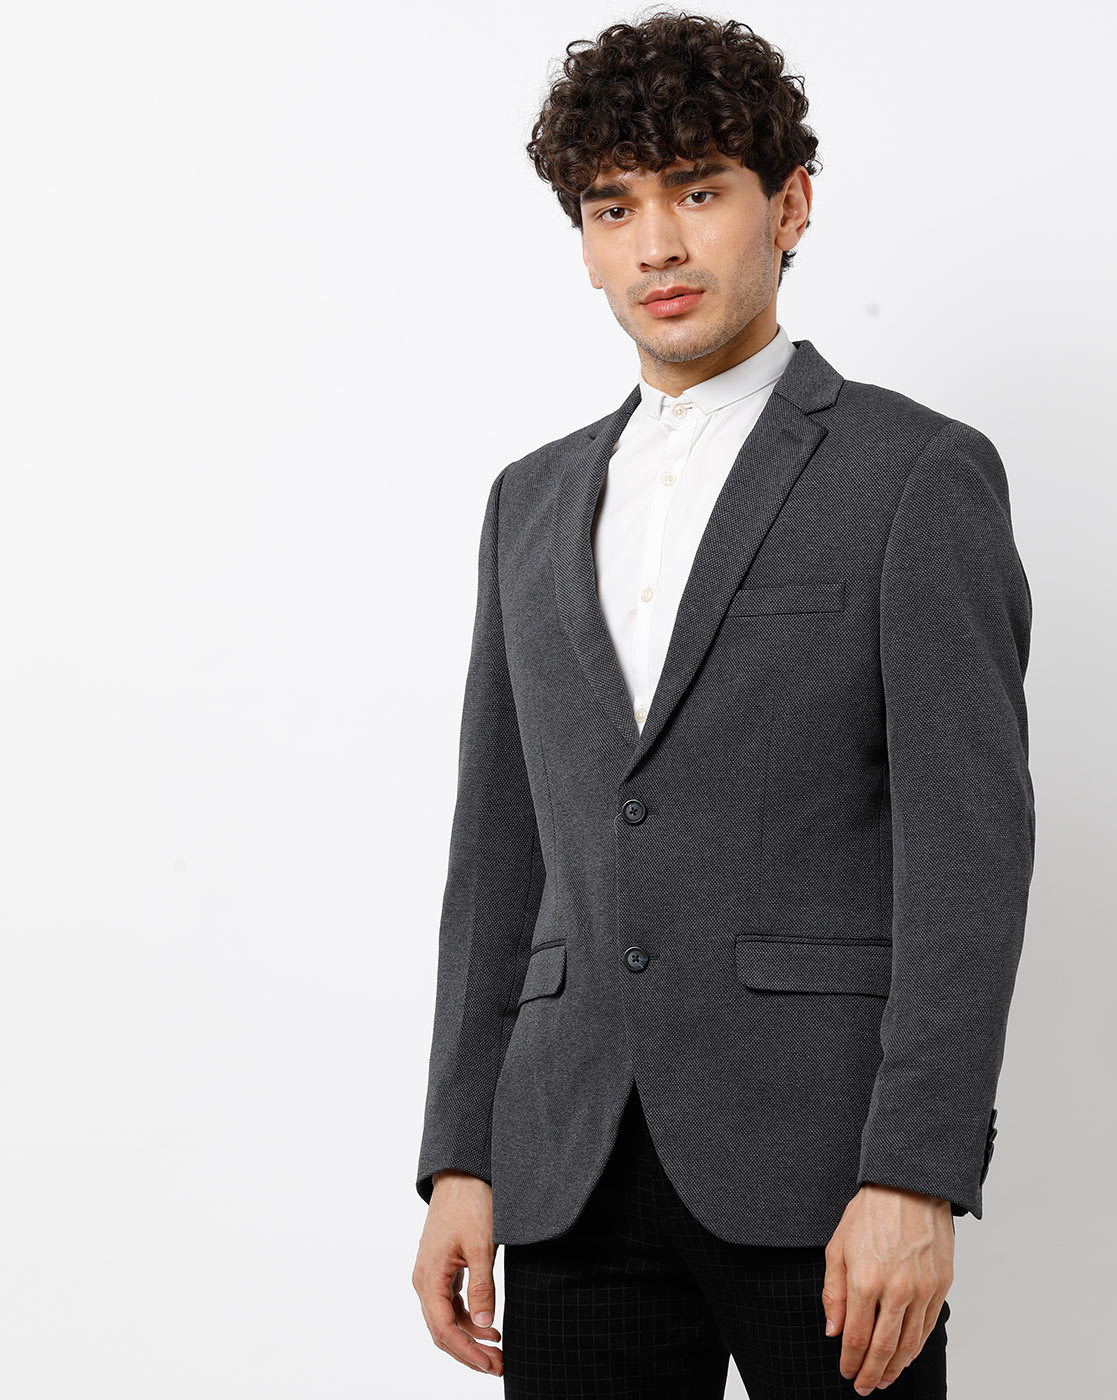 Charcoal Modern Fit 3 Piece Suit with Vest and Adjustable Waist Band P |  Suits Outlets Men's Fashion